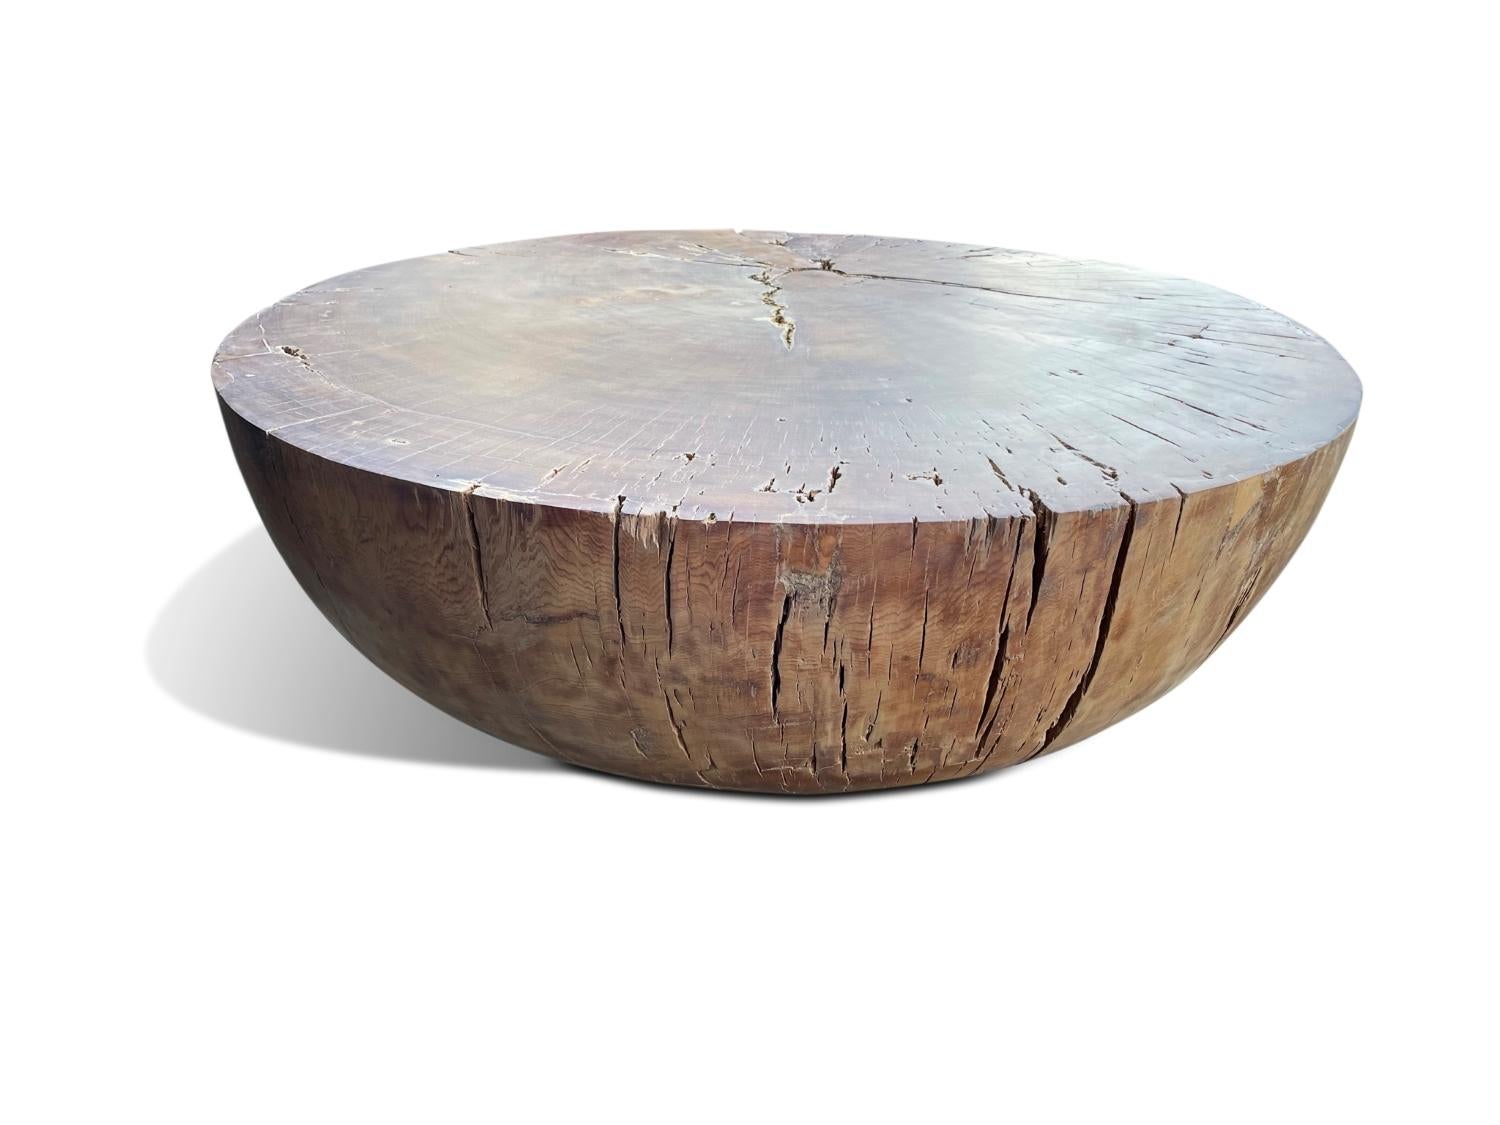 Modern organic drum coffee table made from reclaimed New Zealand ancient Swamp Kauri wood. 

A large modern organic coffee table made from New Zealand 40,000-year-old Ancient Swamp Kauri. Hand carved in Christchurch, New Zealand from a single block